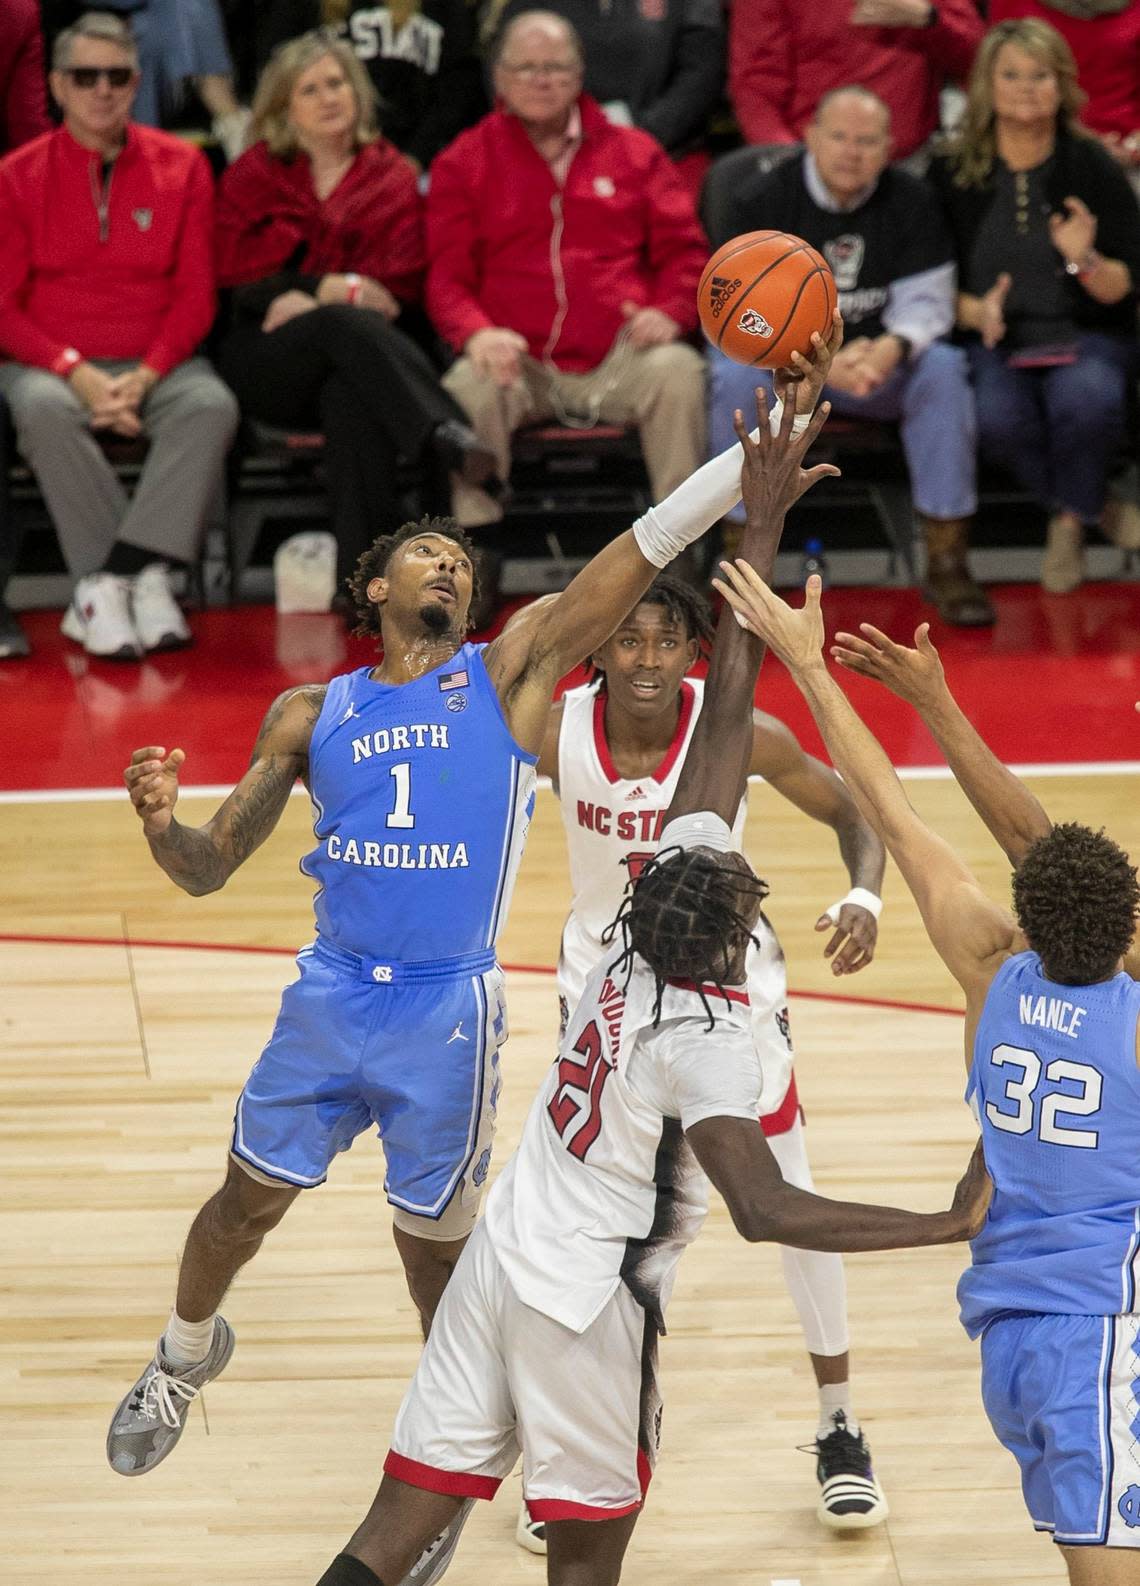 North Carolina’s Leaky Black (1) secures a rebound over N.C. State’s Ebenezer Dowuona (21) during the first half on Sunday, February 19, 2023 at PNC Arena in Raleigh, N.C.